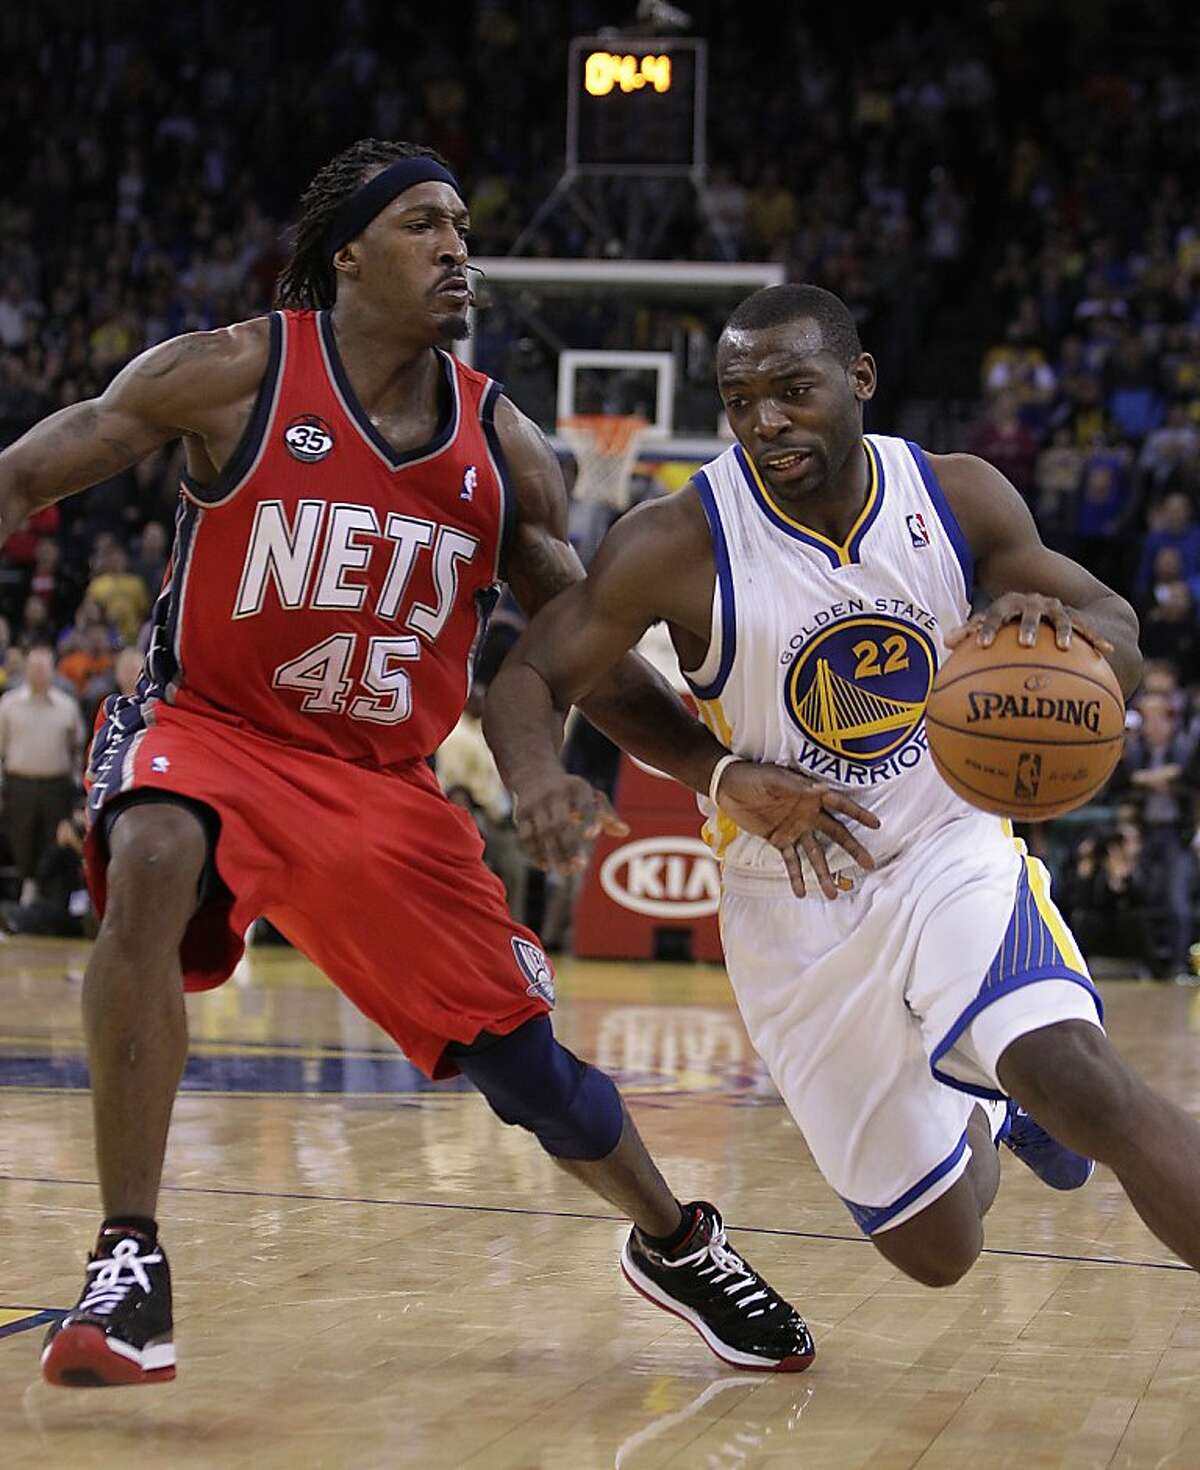 New Jersey Nets' Gerald Wallace, left, guards Golden State Warriors' Charles Jenkins (22) during the second half of an NBA basketball game Friday, March 30, 2012, in Oakland, Calif. (AP Photo/Ben Margot)